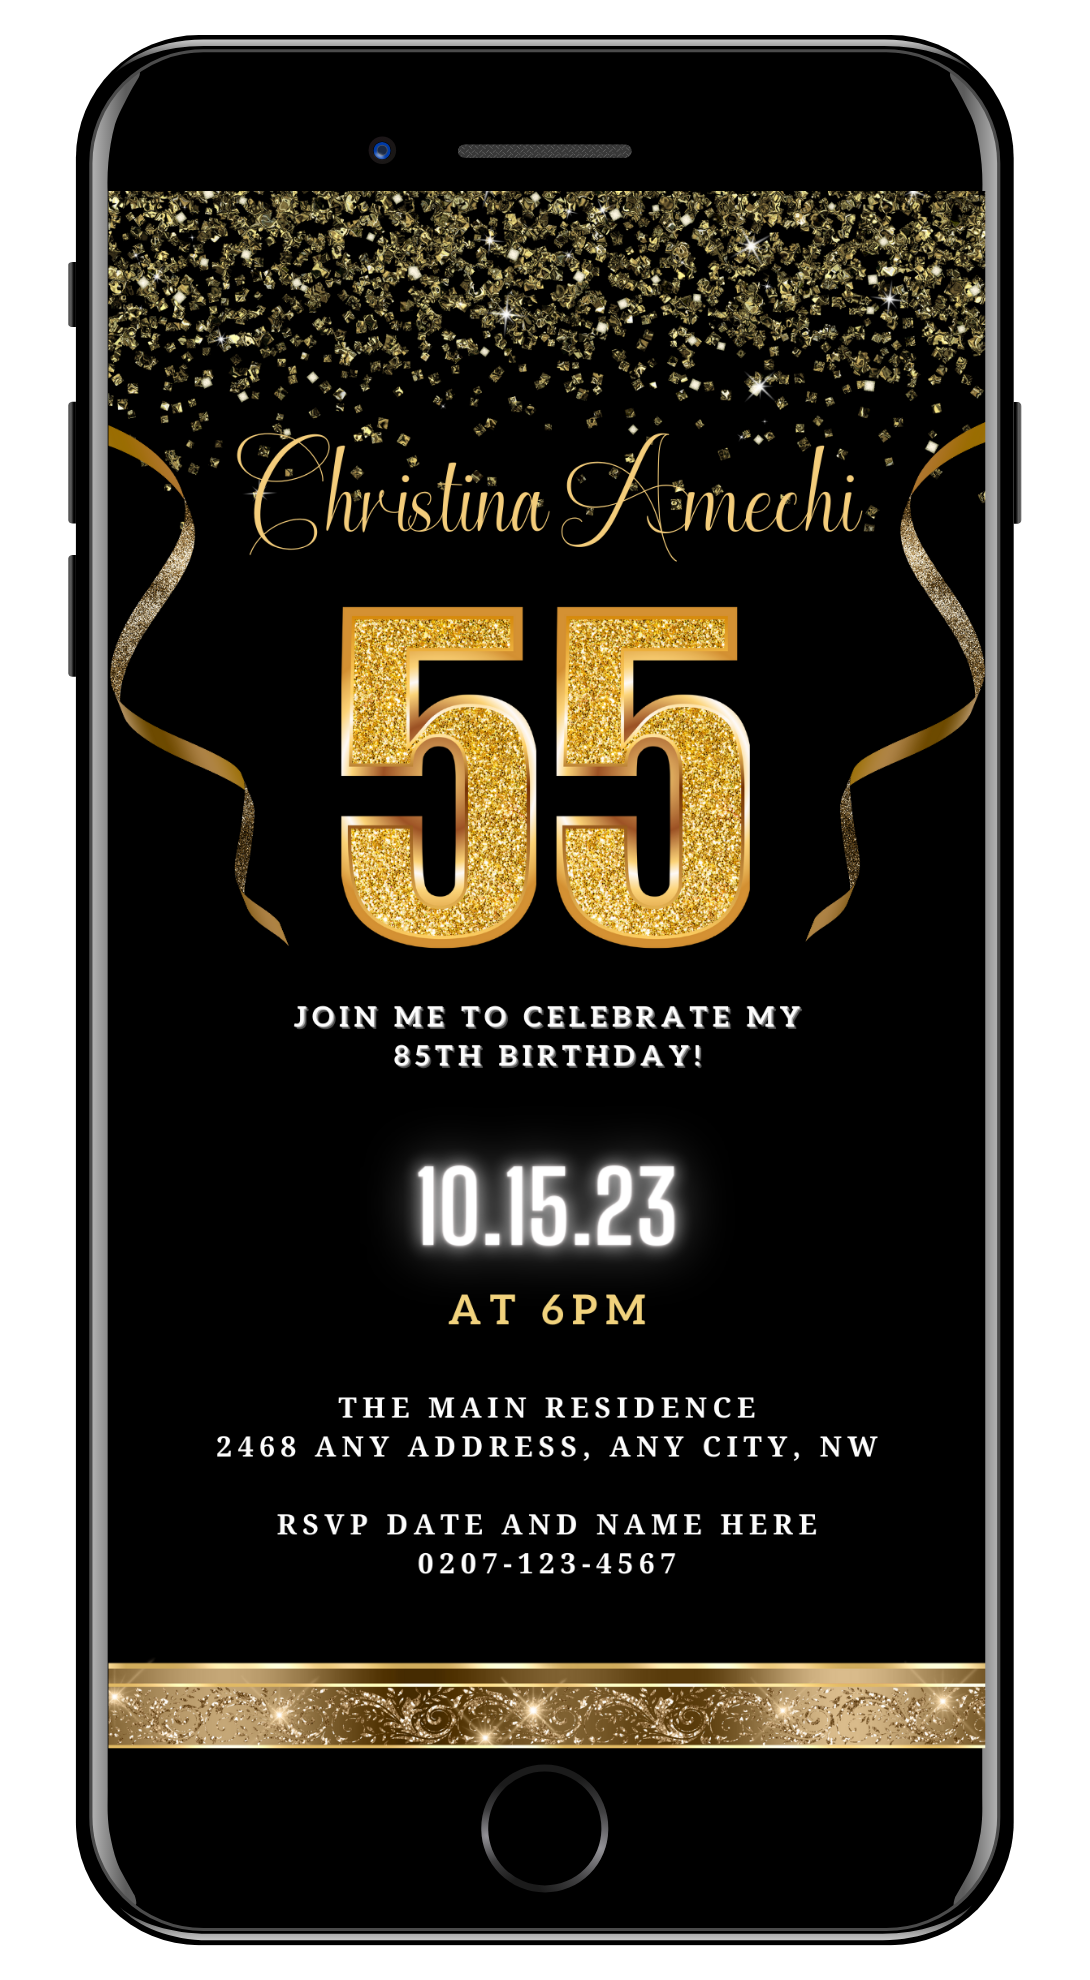 Black and gold digital 55th birthday evite with customizable text and confetti design, ideal for electronic sharing via smartphones and other devices.